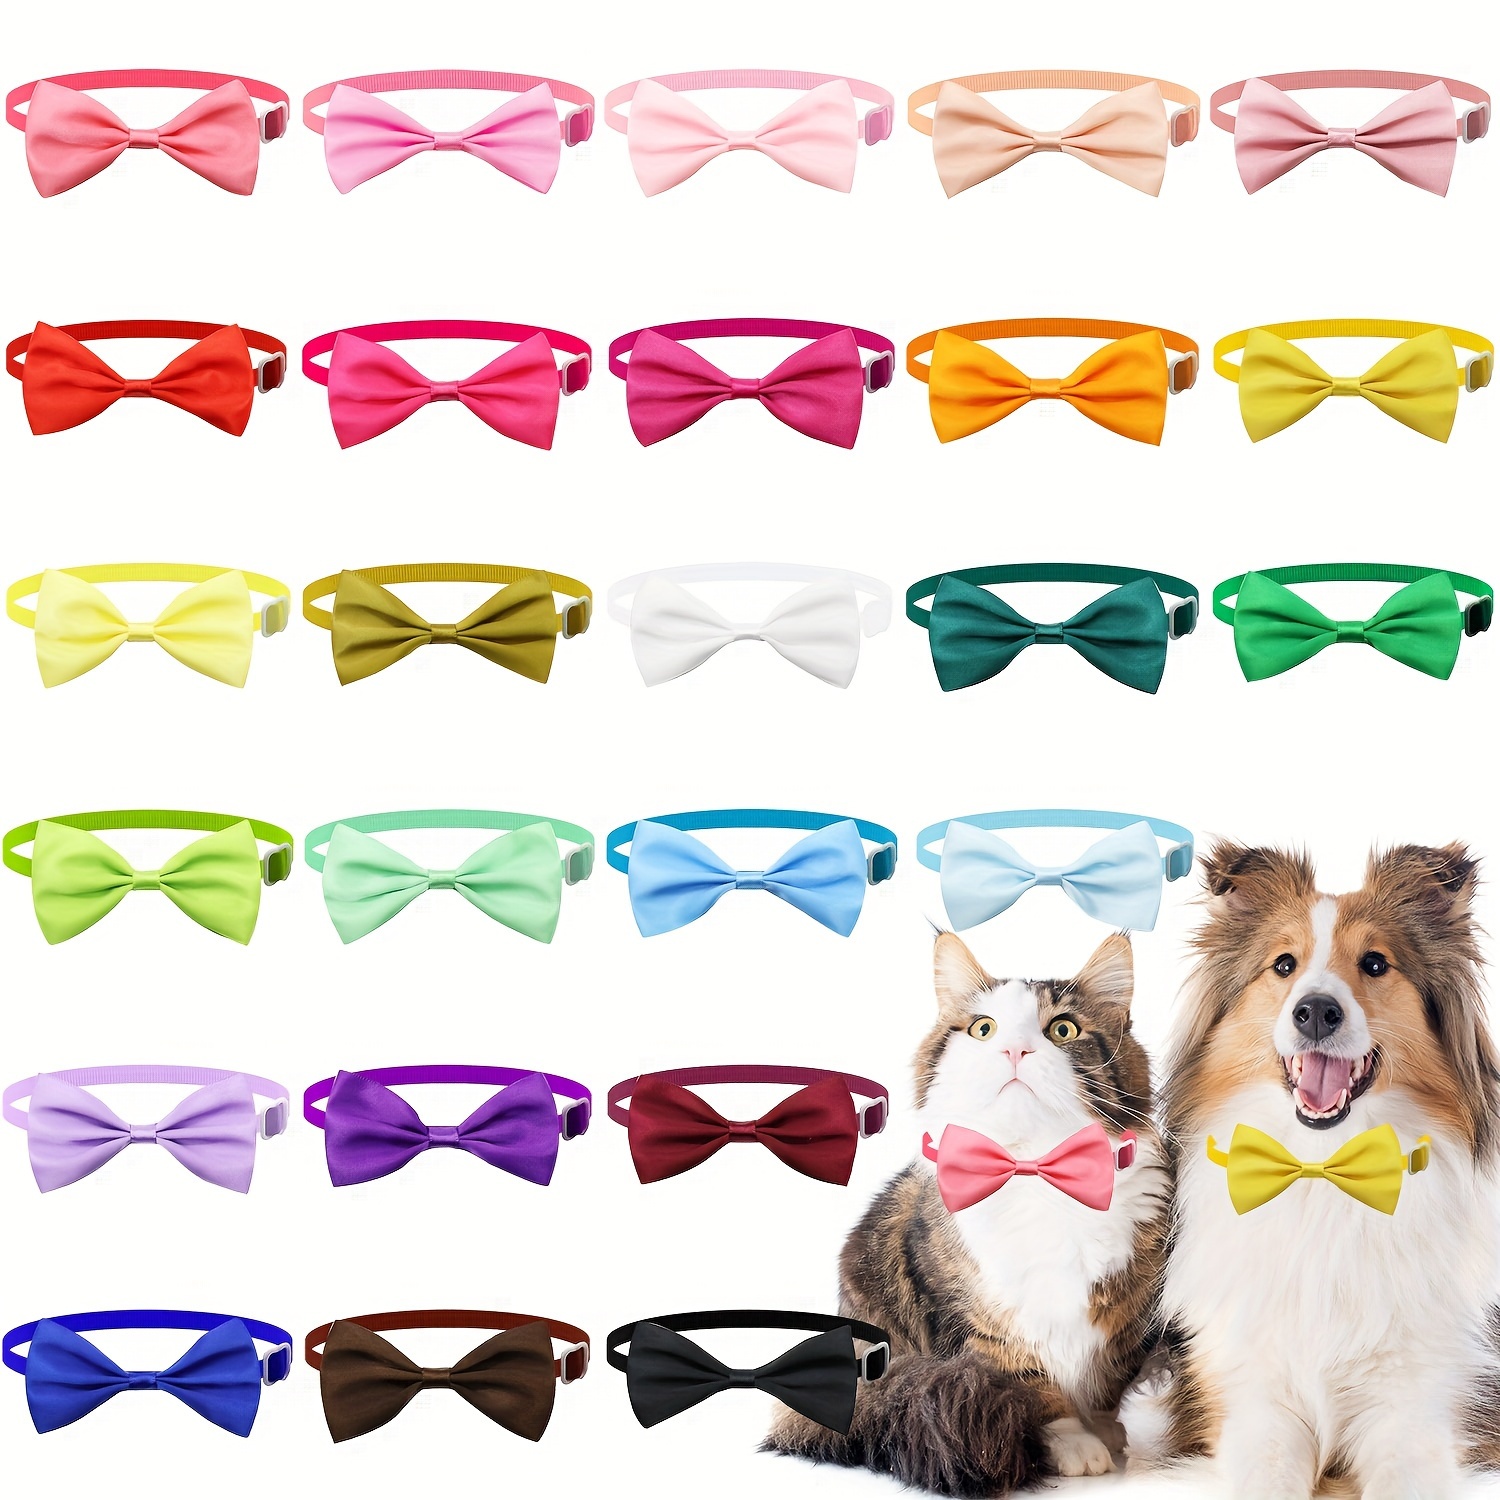 

10 Pieces Dog Bows With Adjustable Collar, Mix Colors Neck Bow Ties For Dogs, Small Medium Pet Daily Accessories Cat Collar With Bow Wedding Birthday Party Gift